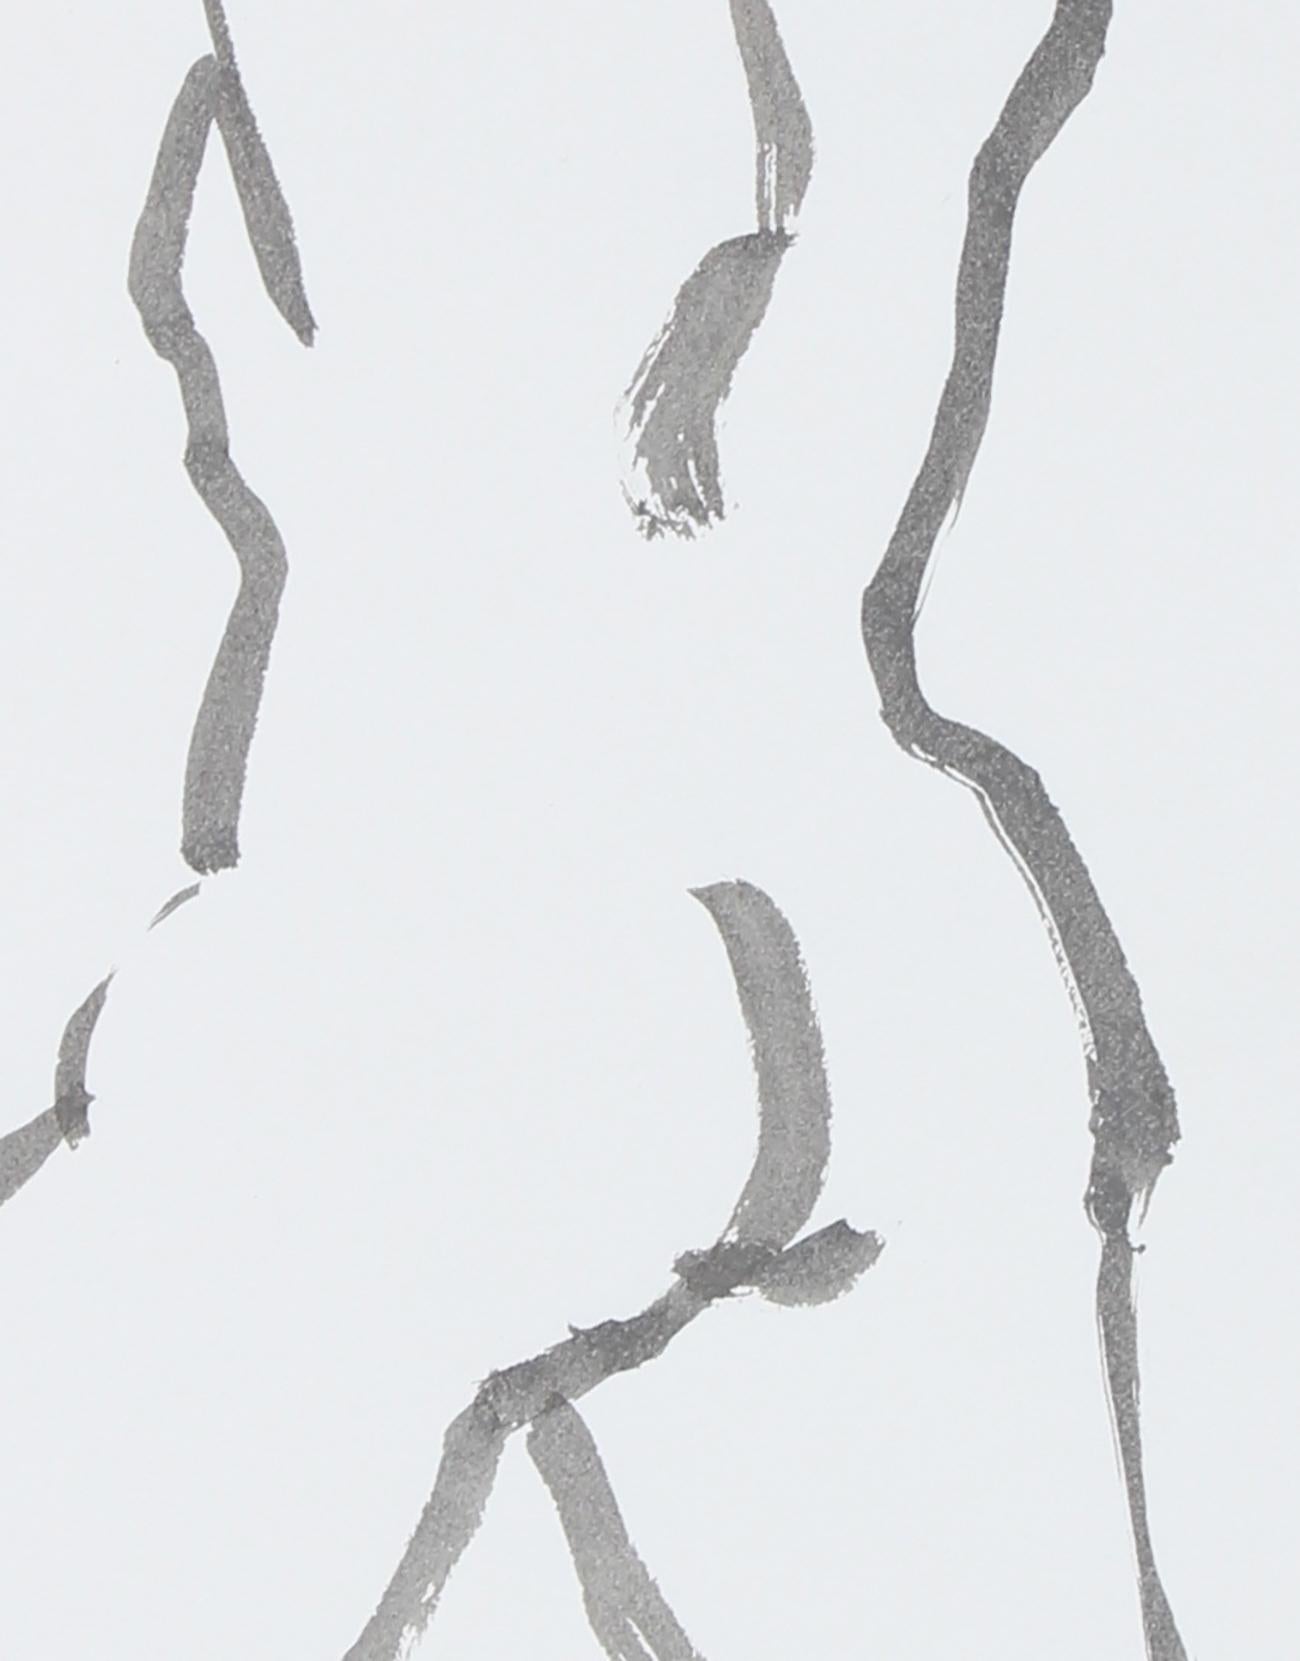 Nude Figurative Line Drawing in Ink Wash on Paper, 20th Century - American Modern Art by Rip Matteson